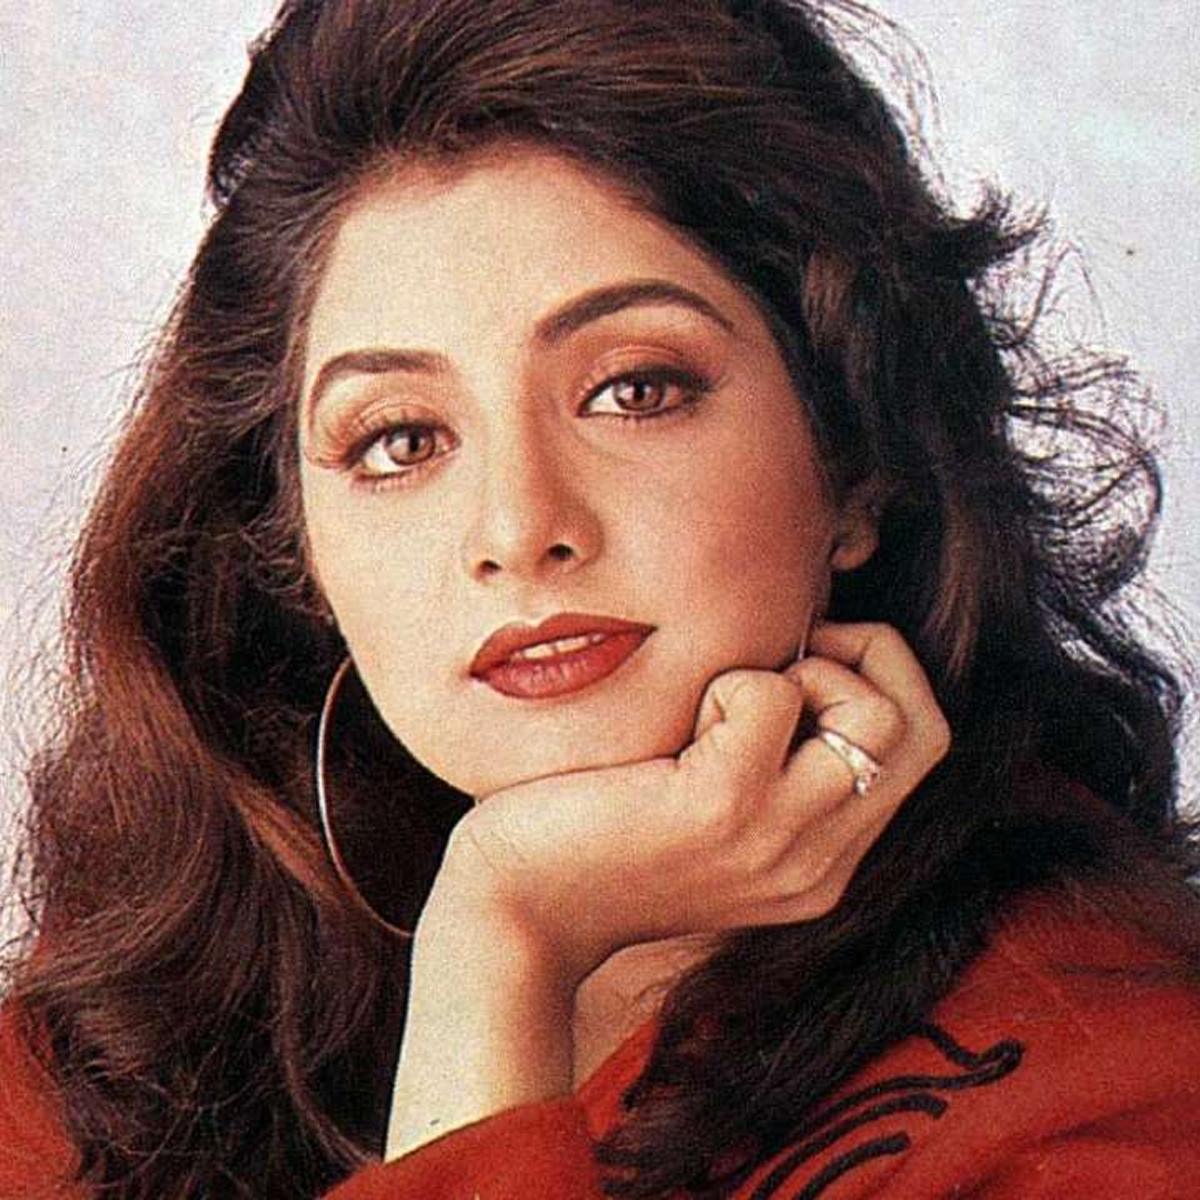 Divya Bh Xxx Video - Divya Bharti, Indian actress | February 25 Celebrity Birthdays: Check List  of Famous Personalities Born on Feb 25 | Latest Photos, Images & Galleries  | LatestLY.com